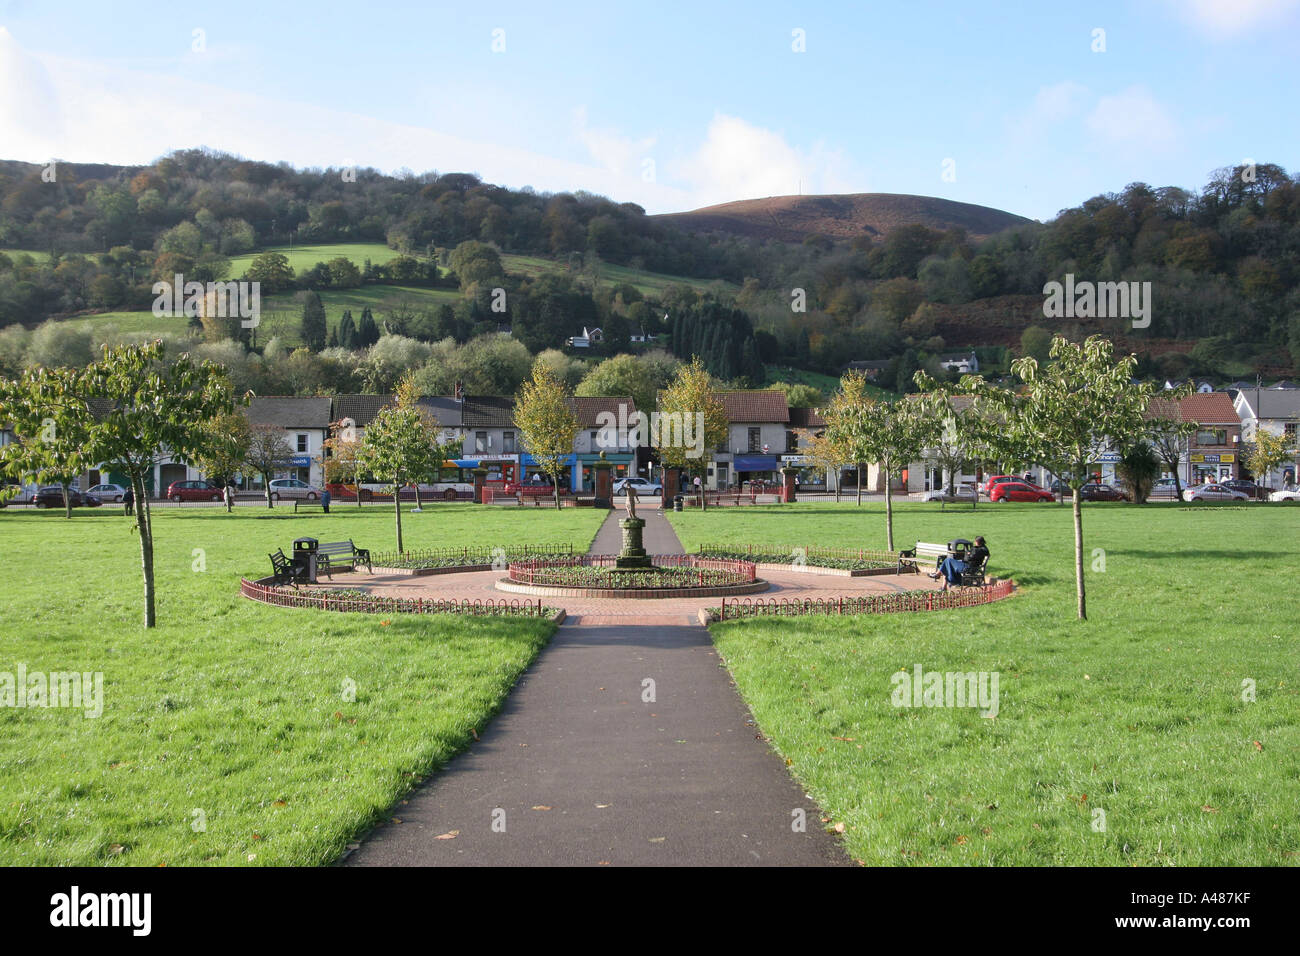 Park with Ornamental Garden and Statue Risca Village South East Wales Stock Photo